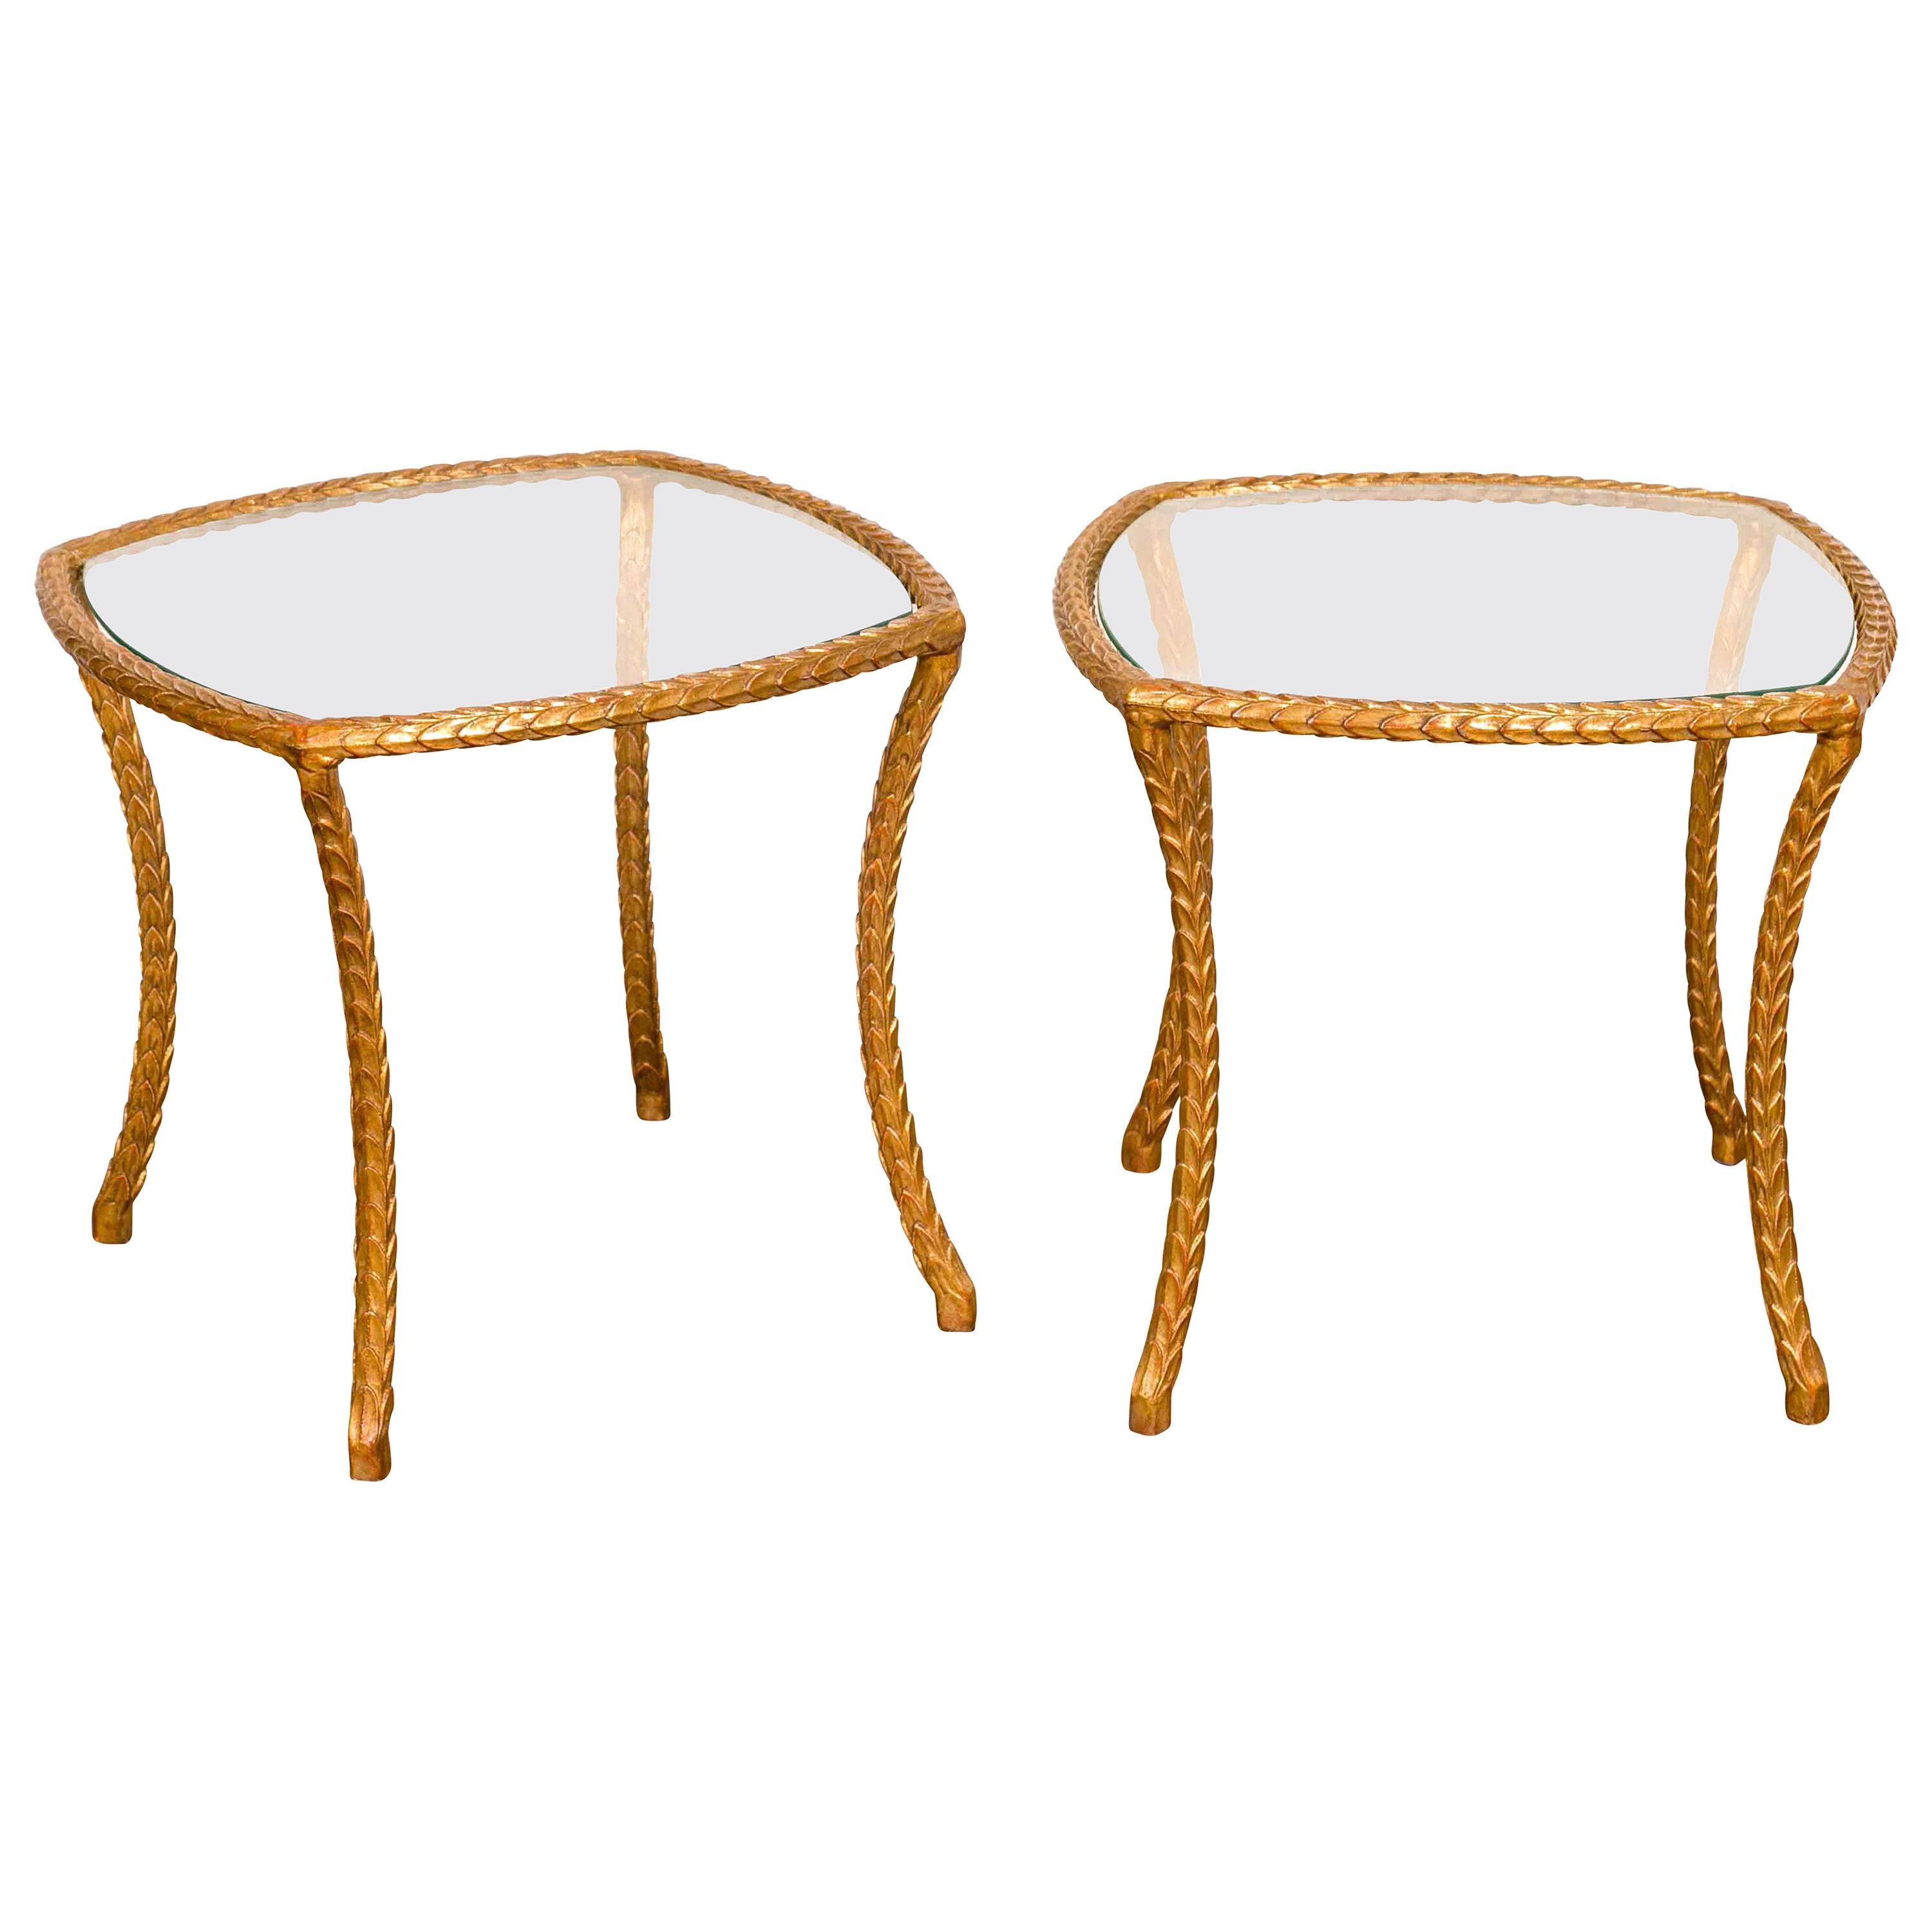 Pair of Midcentury French Maison Baguès Style Gilt Bronze Tables with Glass Tops For Sale